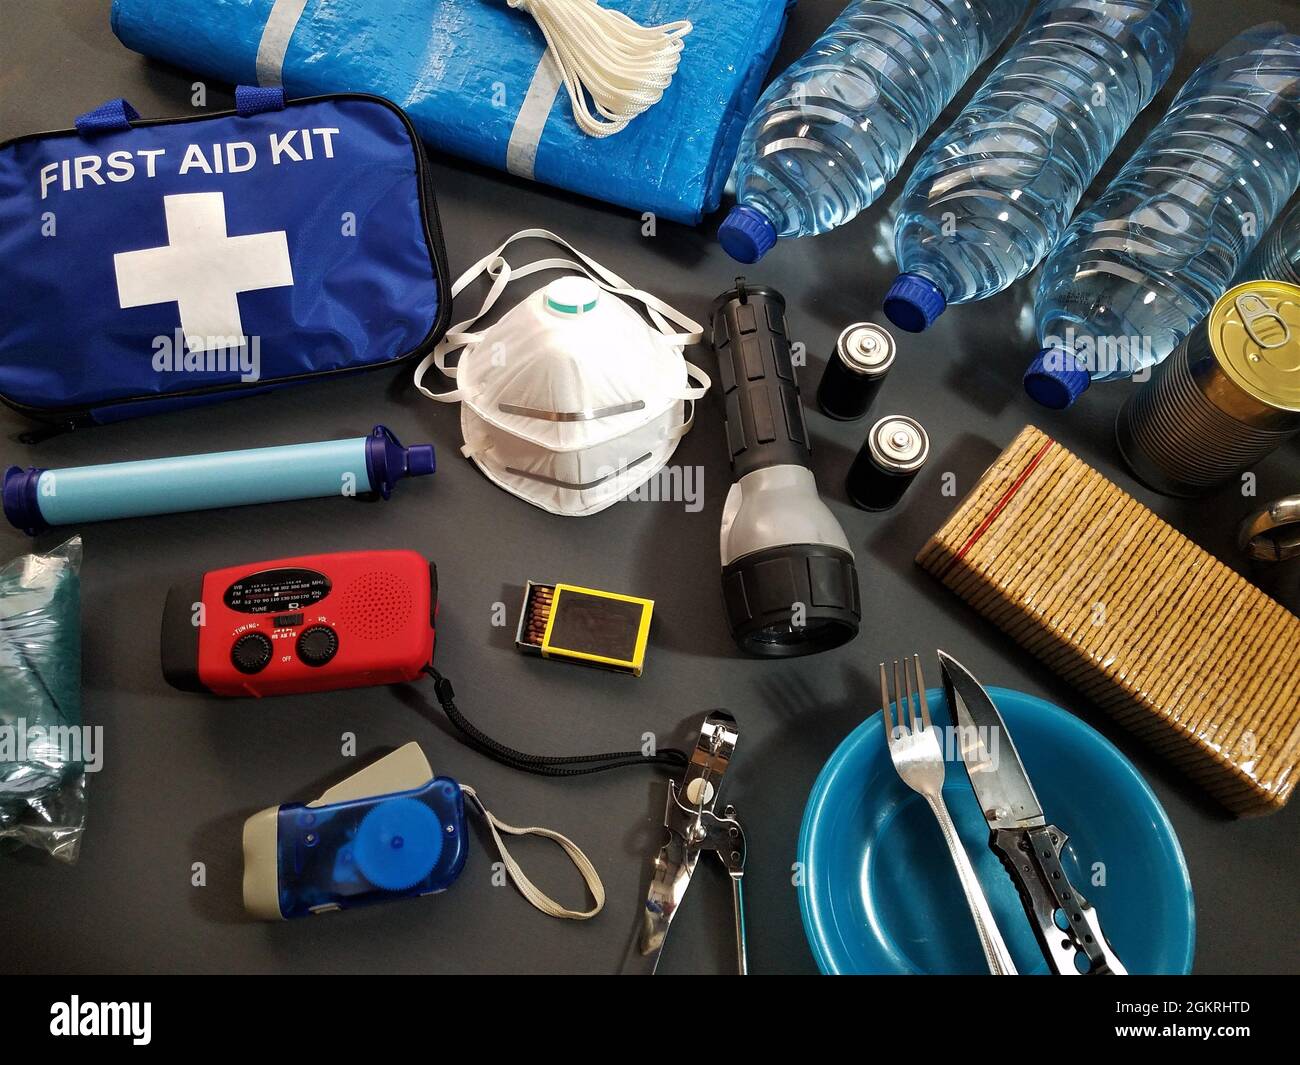 Disaster management includes preparing a disaster kit that can be contained in a go bag.These items should include a first aid kit,food,water Stock Photo